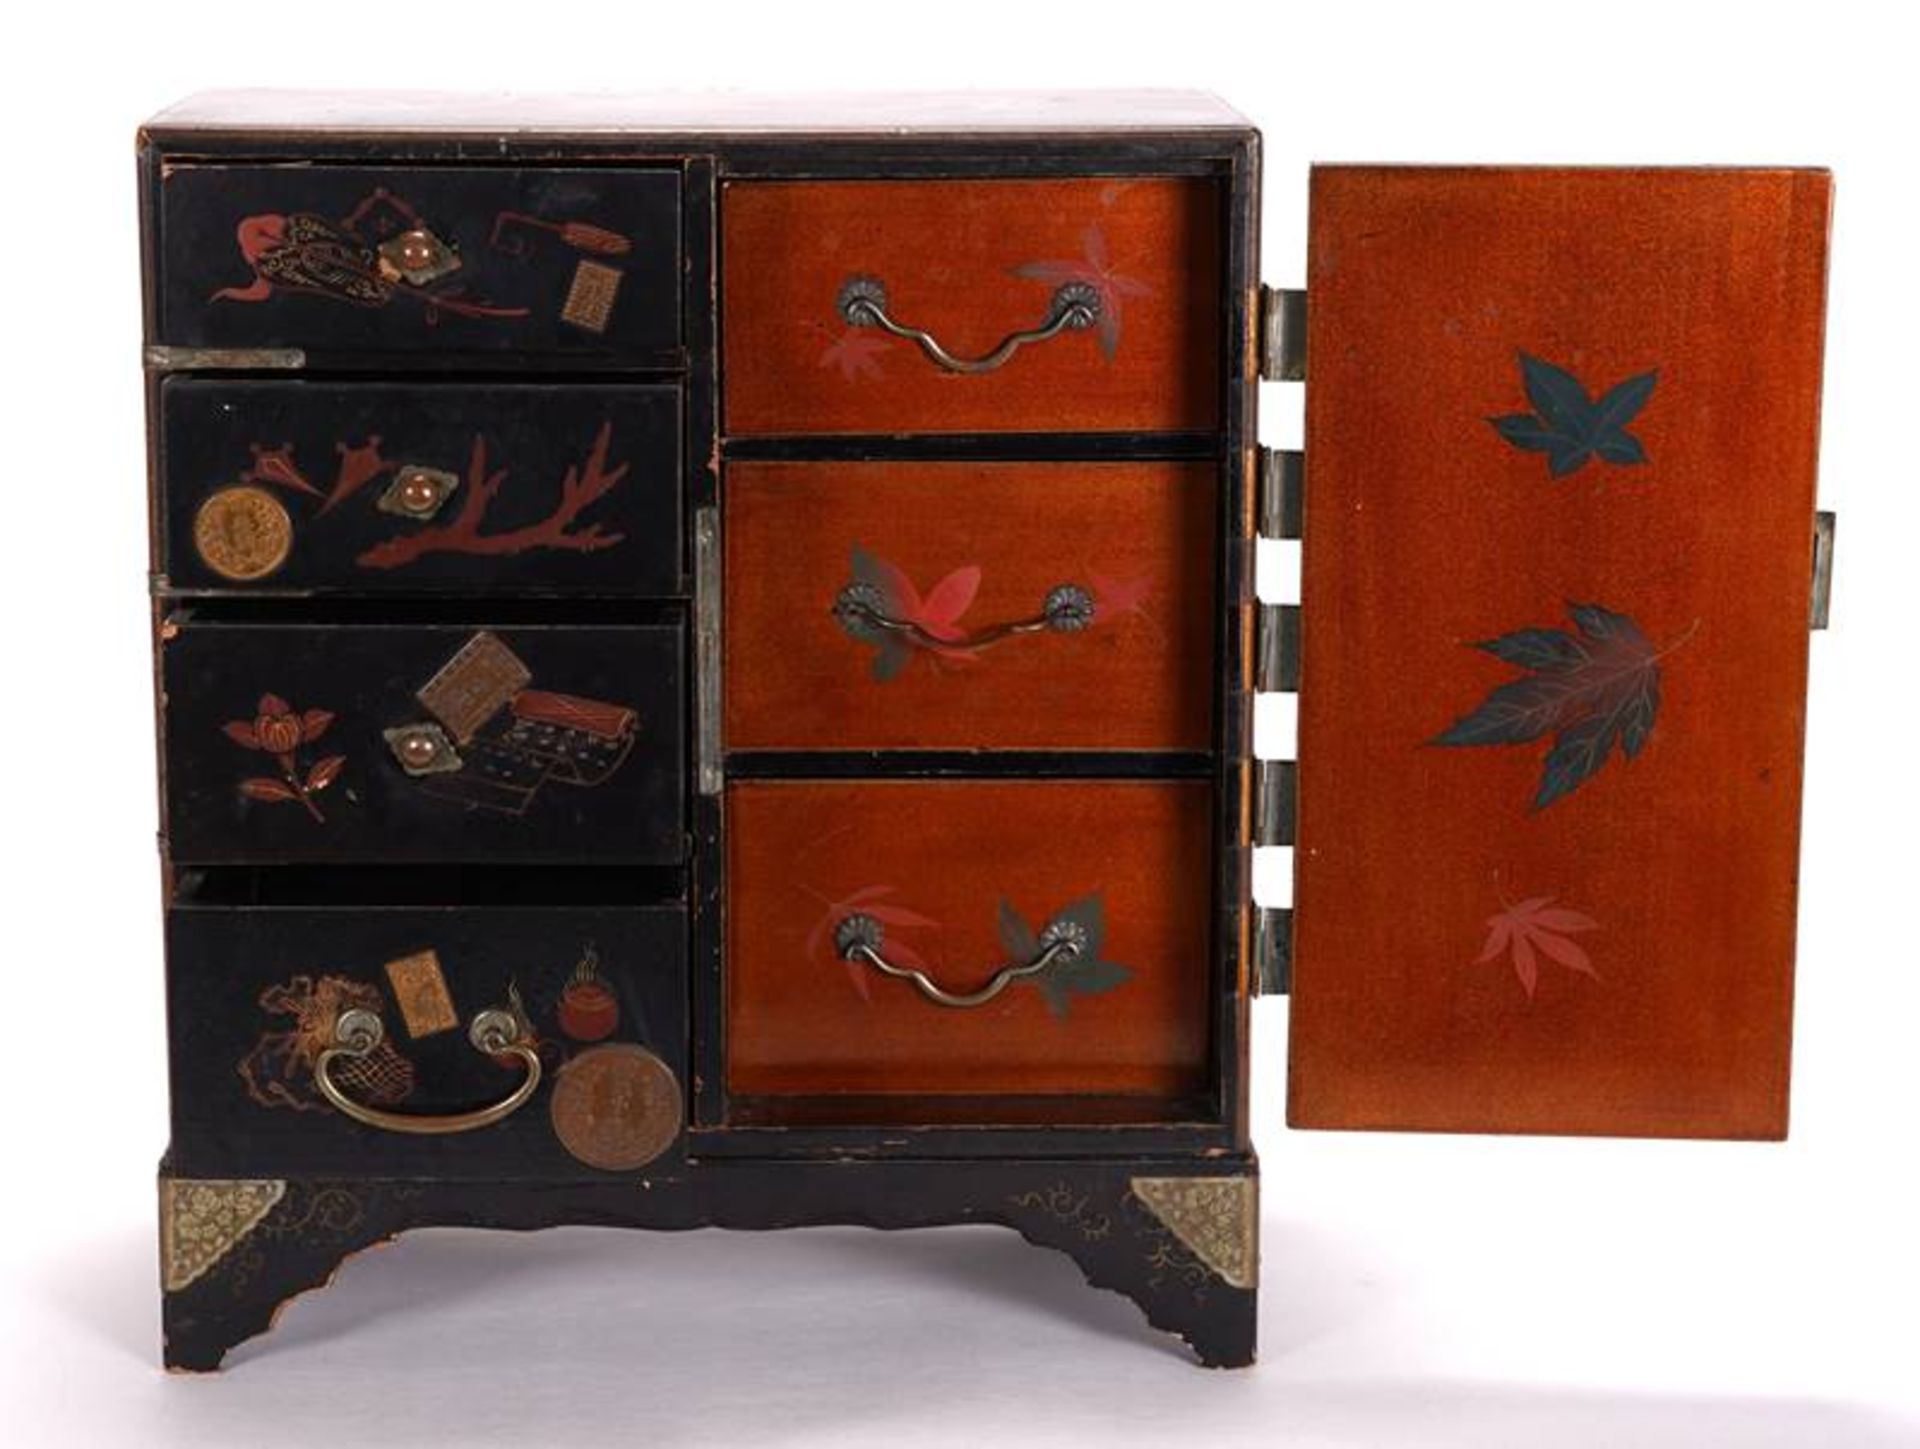 Japanese lacquer cabinet - Image 2 of 6